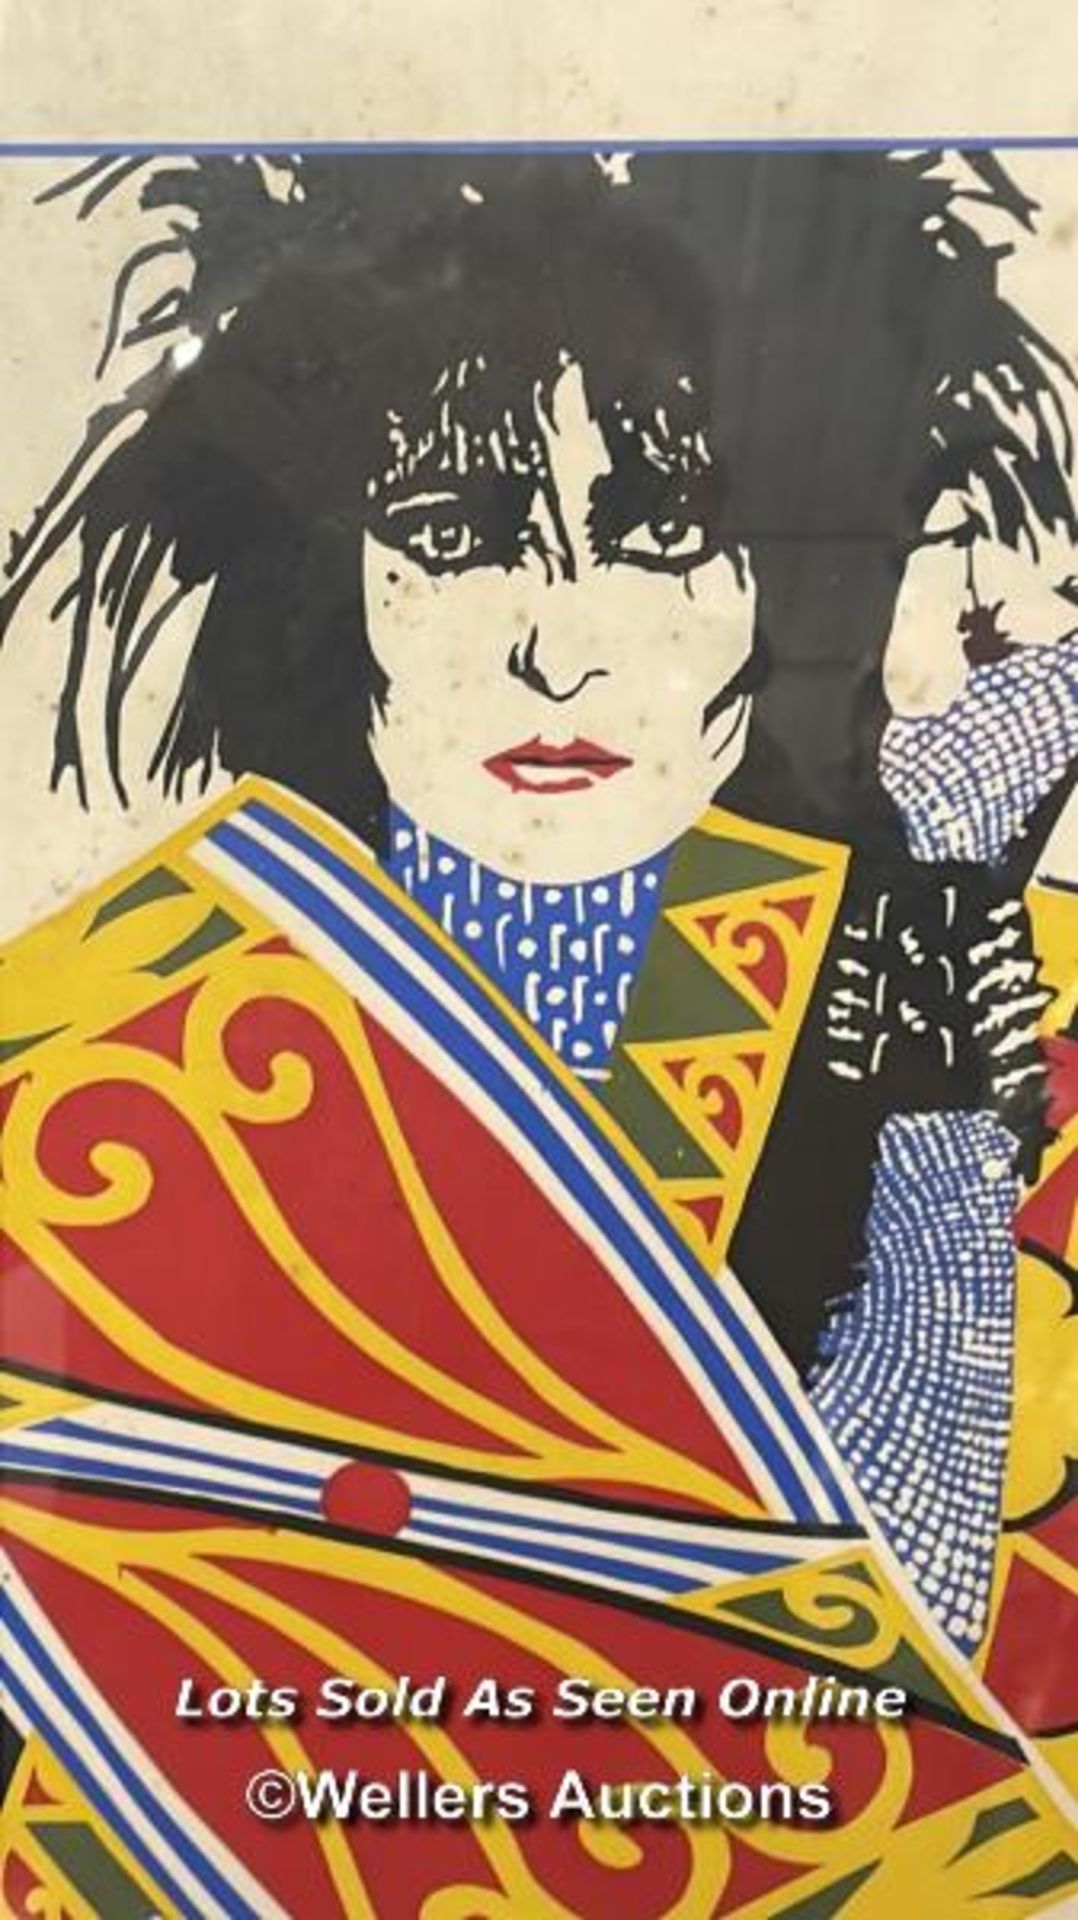 Siouxsie and the Banshees -Siouxsie Sioux original screen print "Queen of Clubs" framed & glazed - Image 2 of 5